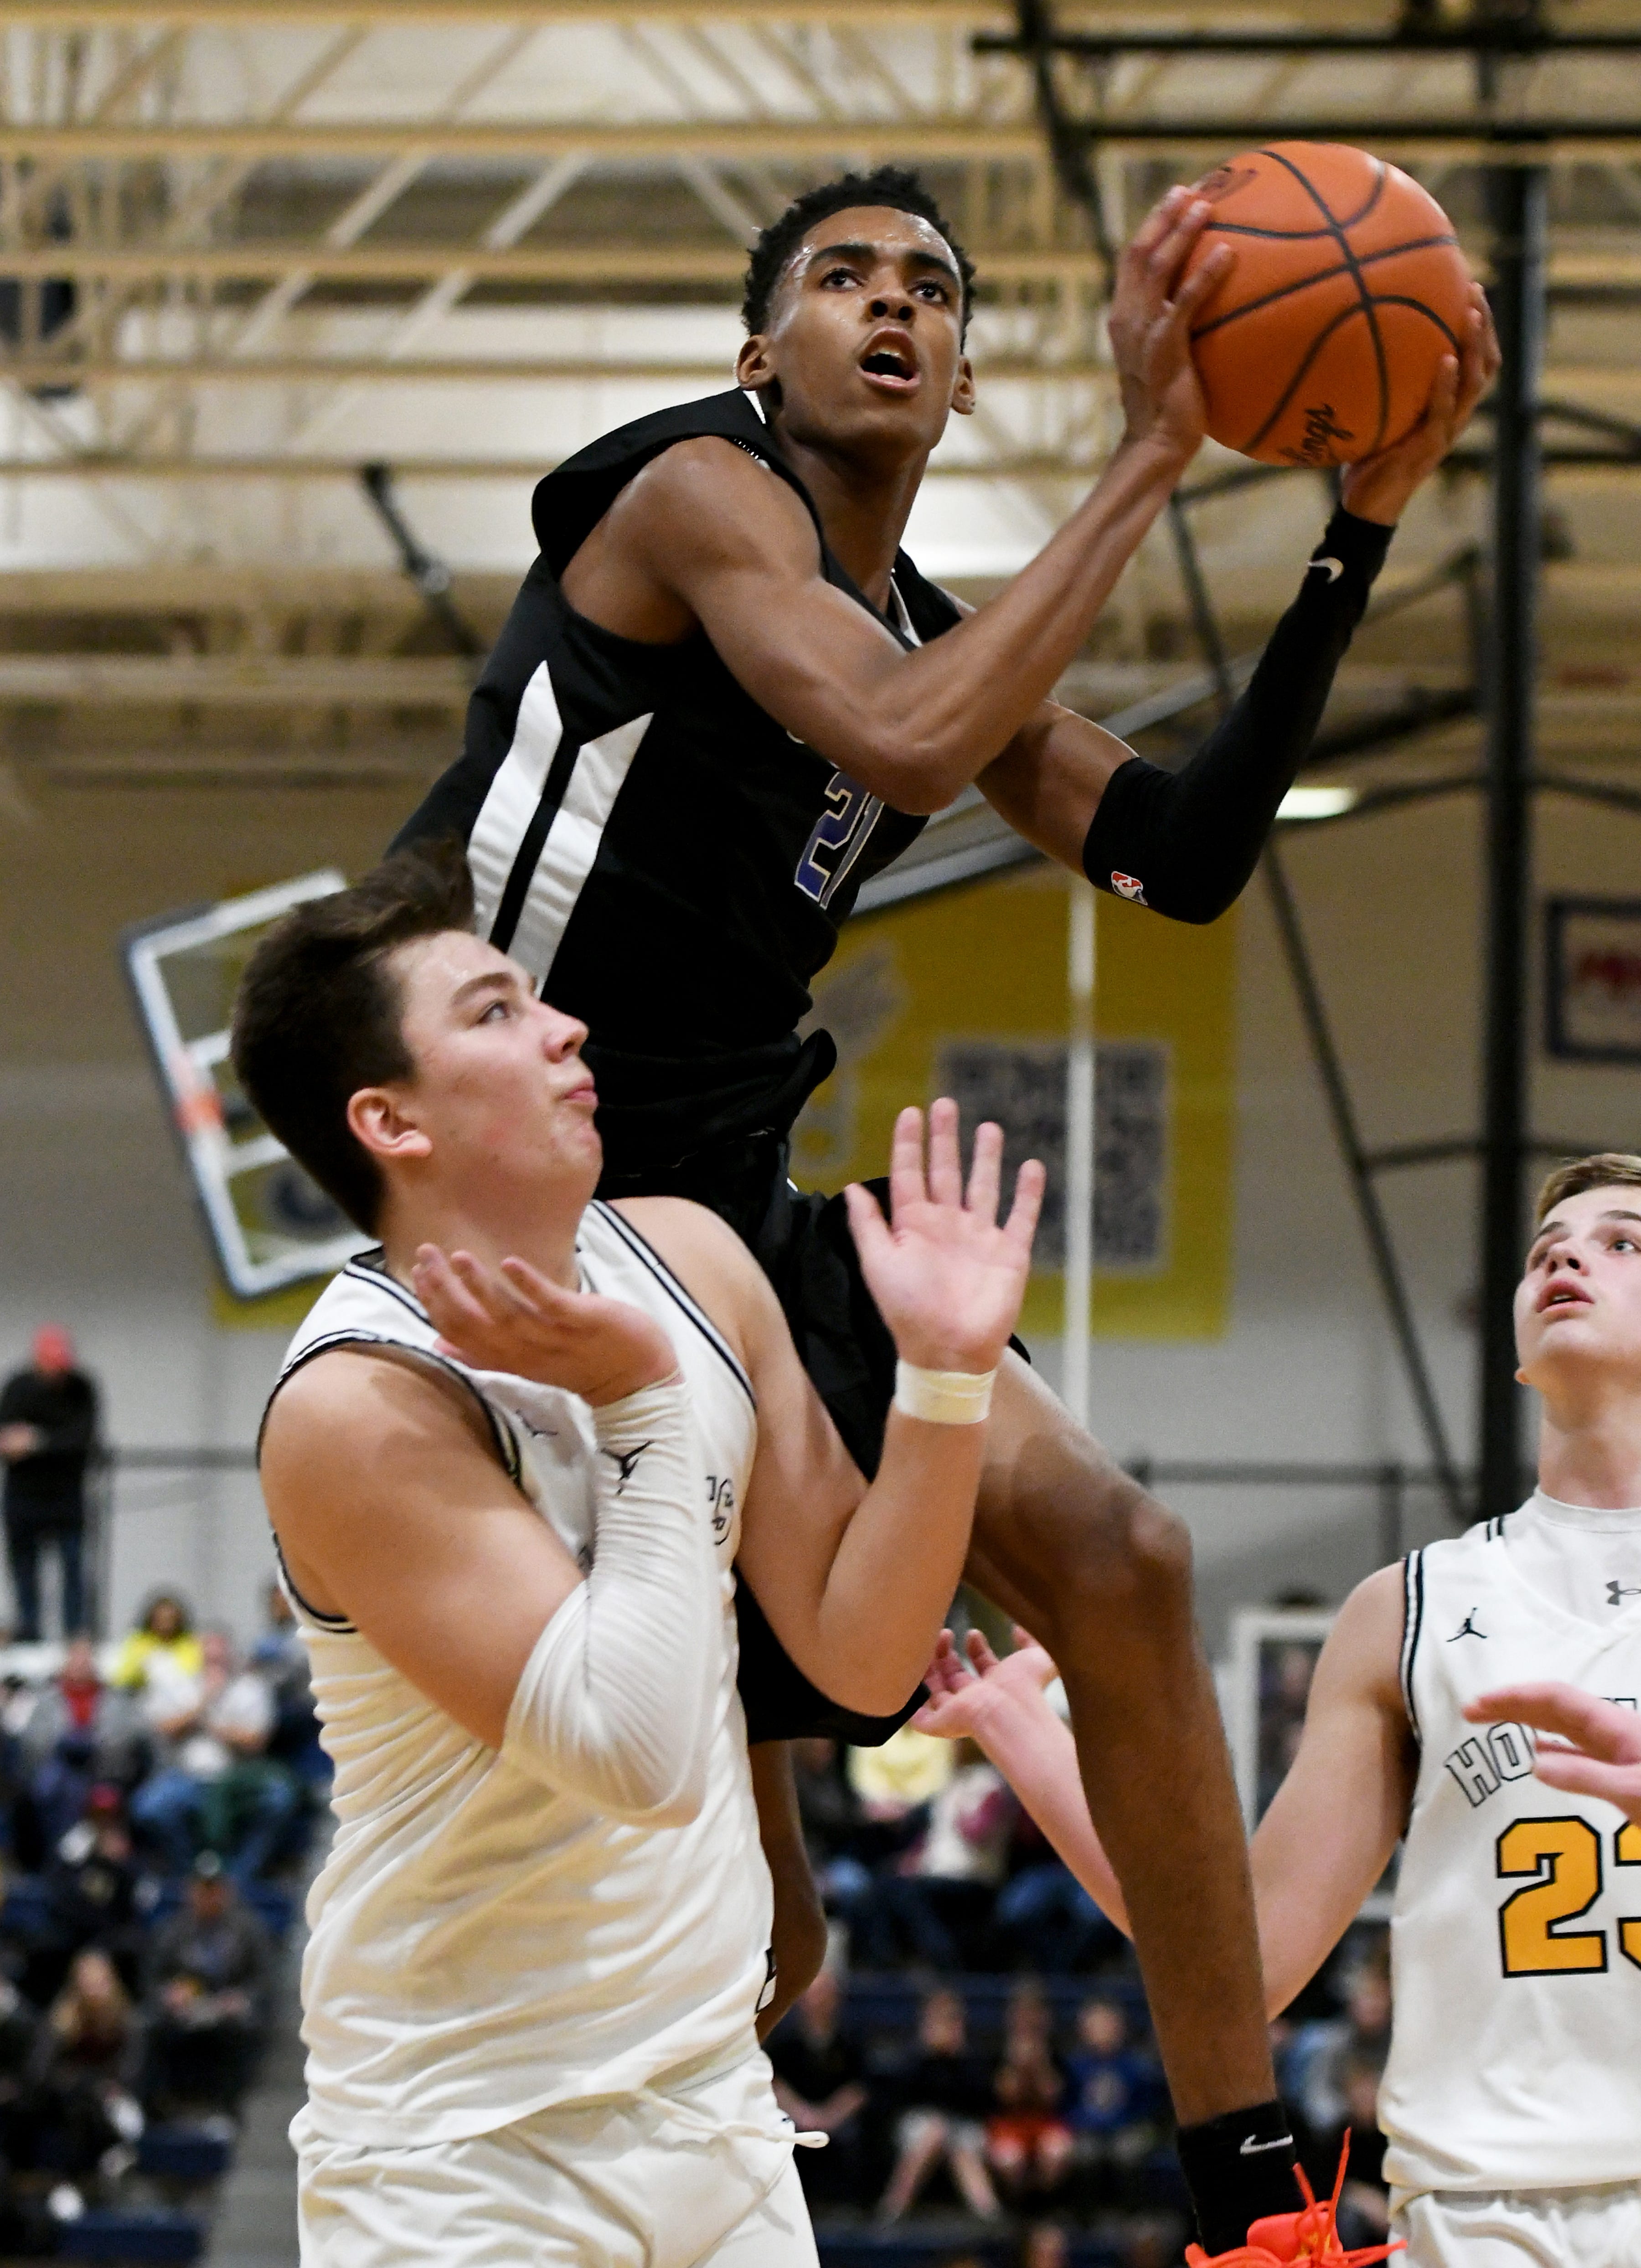 Lincoln High School freshman Emoni Bates drives to the hoop past Saline High School's Logan Evans, bottom, and Griffin Yaklich, right, to pop in two of his game-high 28 points for the Railsplitters in their 70-39 win over Saline, Dec. 7 at Saline High School.